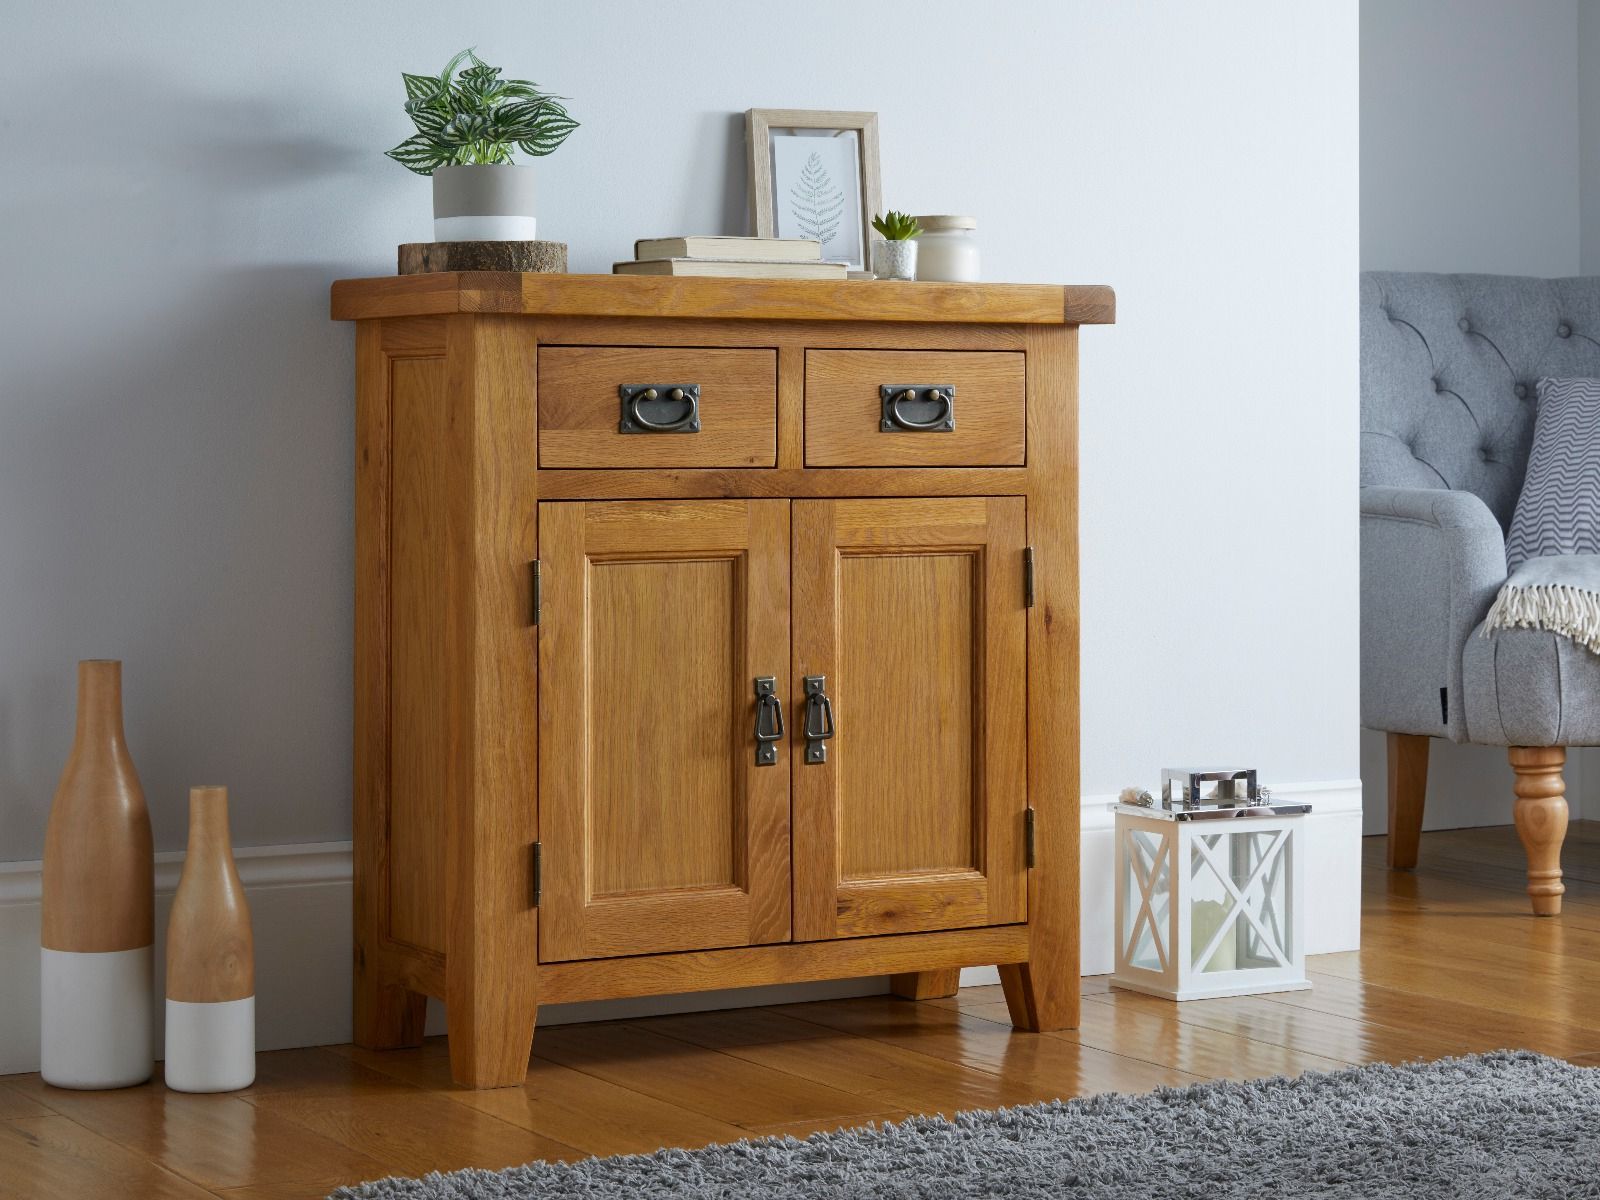 Small Oak Sideboard 80cm – Free Delivery | Top Furniture With Regard To Rustic Oak Sideboards (Gallery 17 of 20)